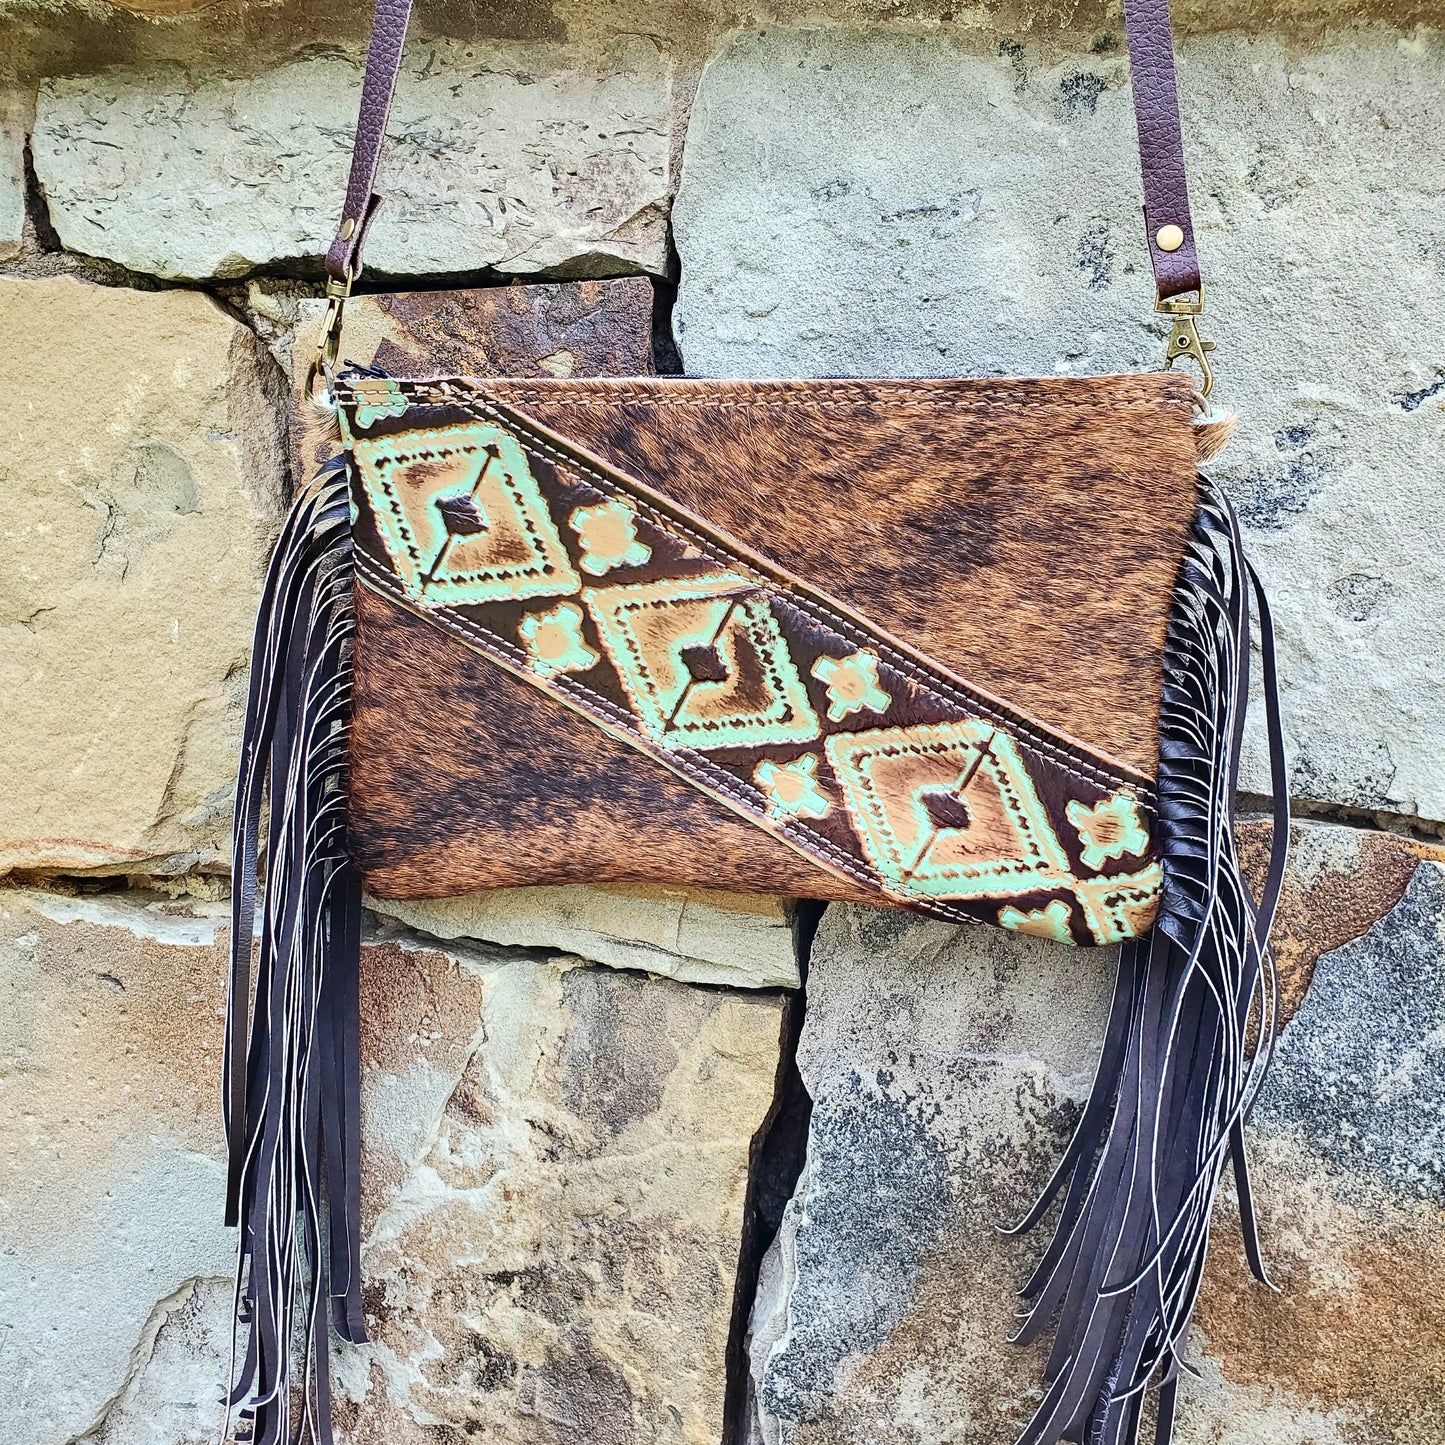 Hair on Hide Handbag w/ Leather Fringe and Navajo Side Accent 501z